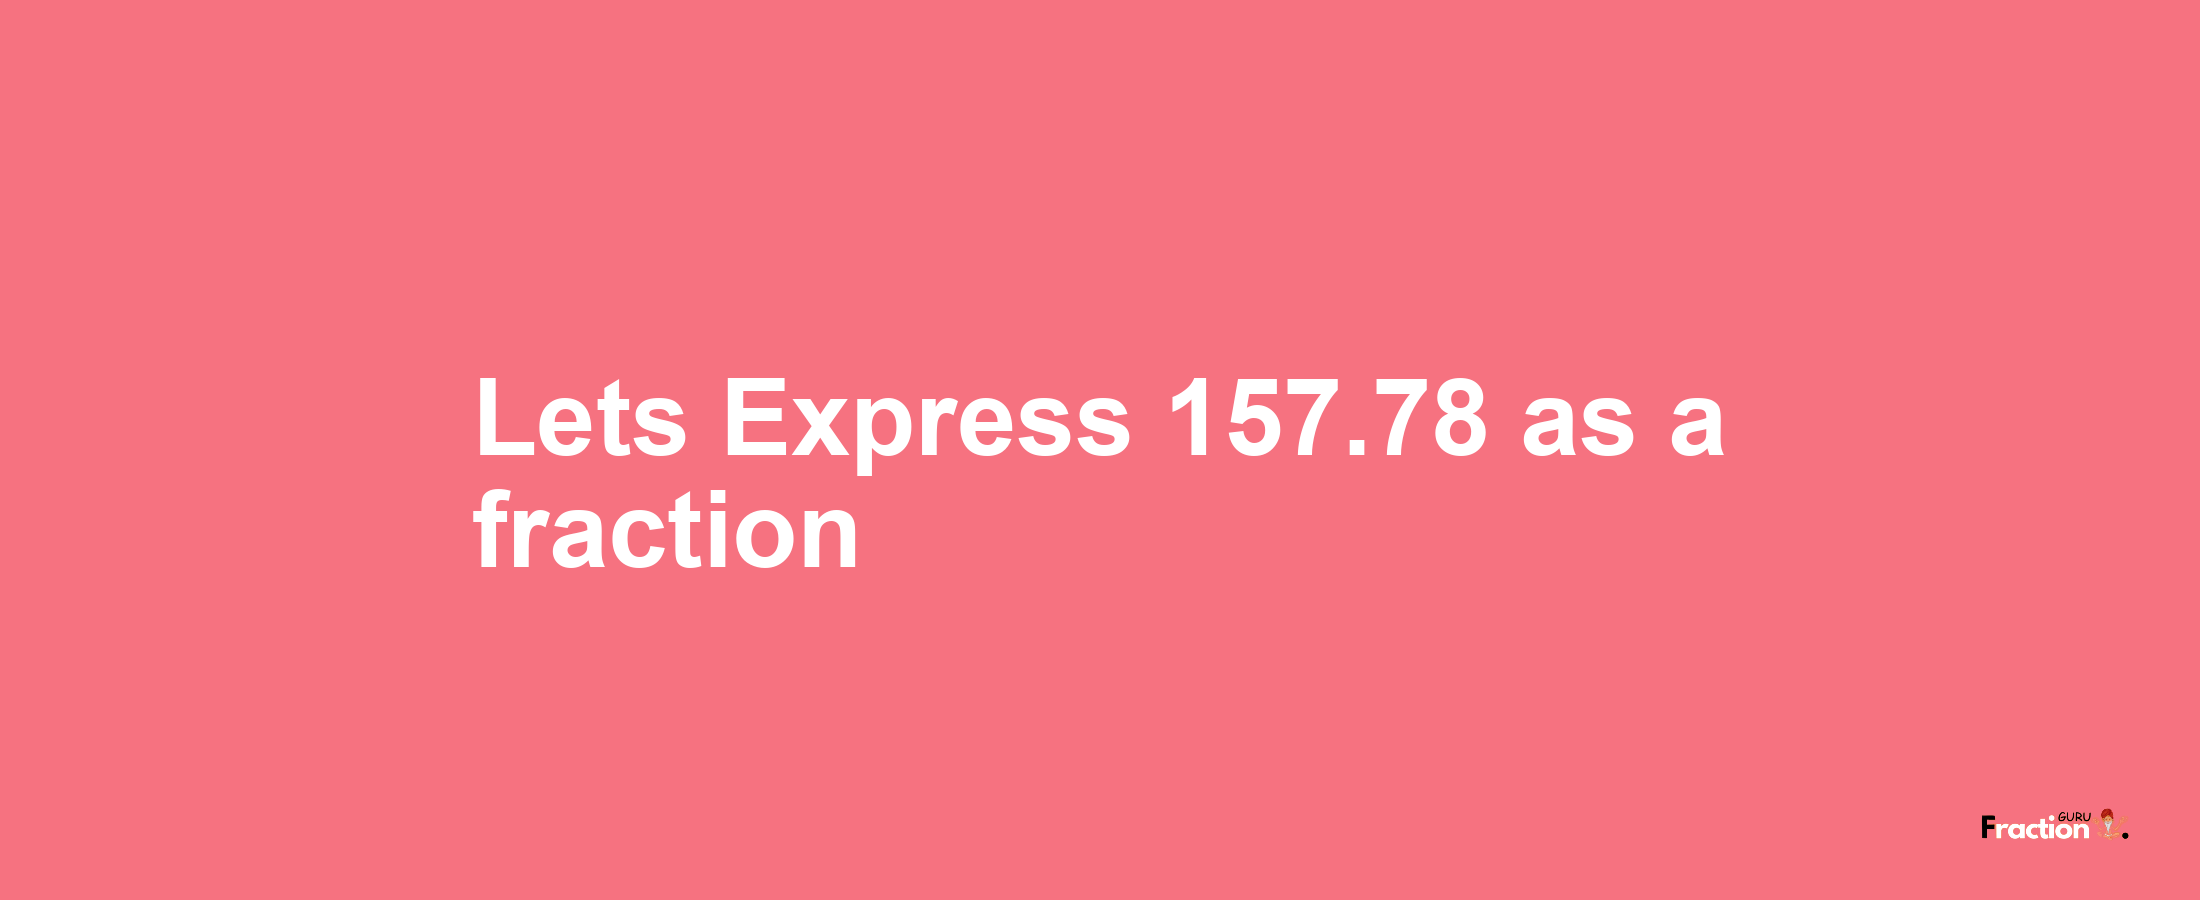 Lets Express 157.78 as afraction